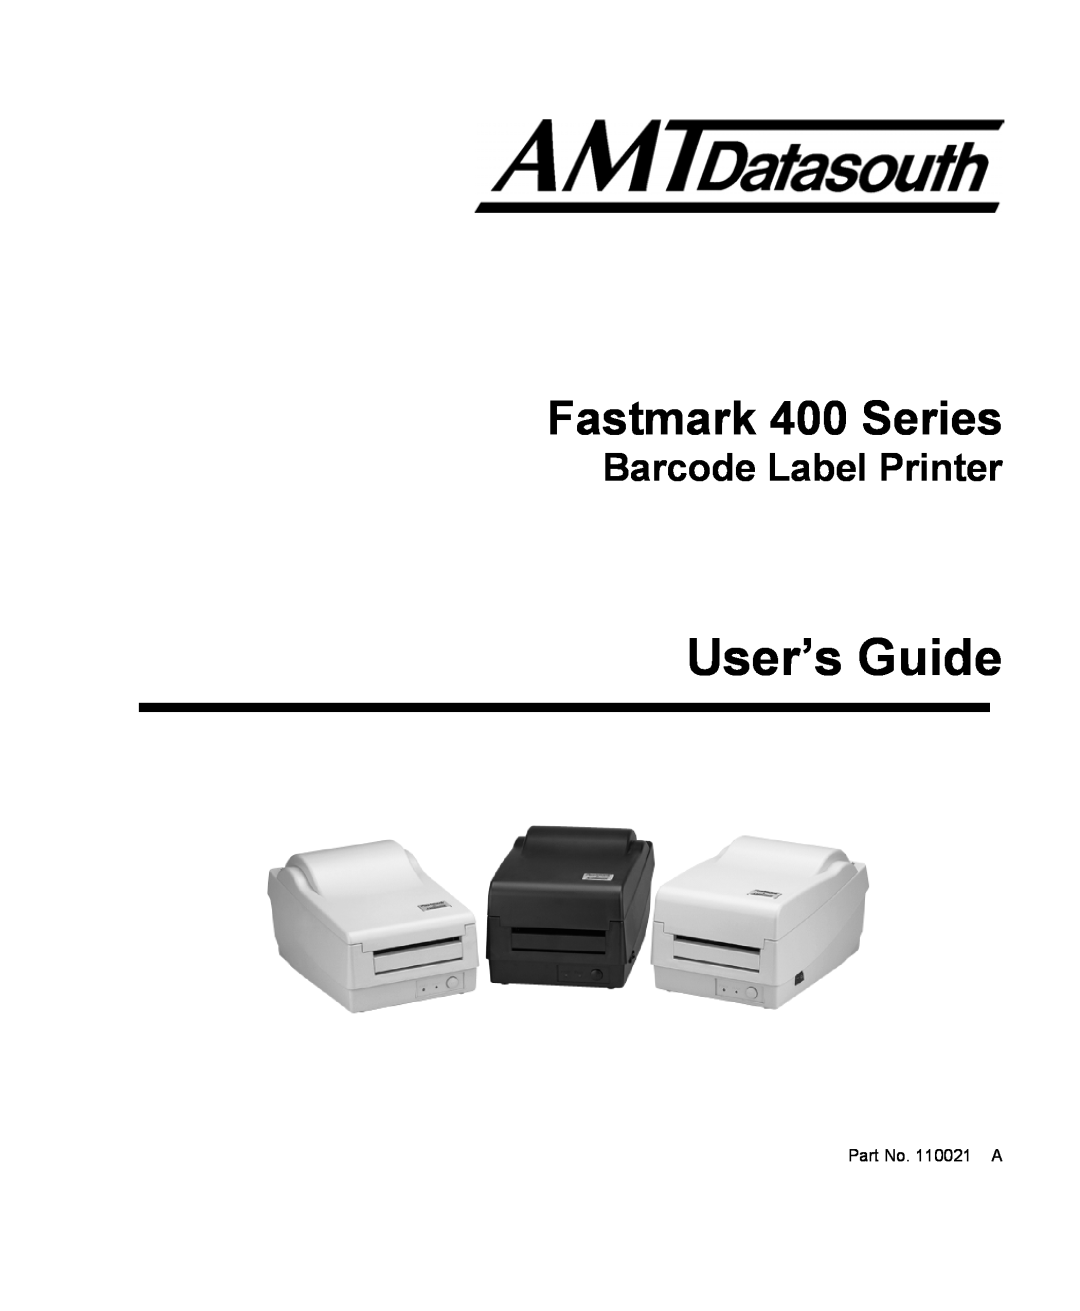 AMT Datasouth manual User’s Guide, Fastmark 400 Series, Barcode Label Printer, Part No. 110021 A 